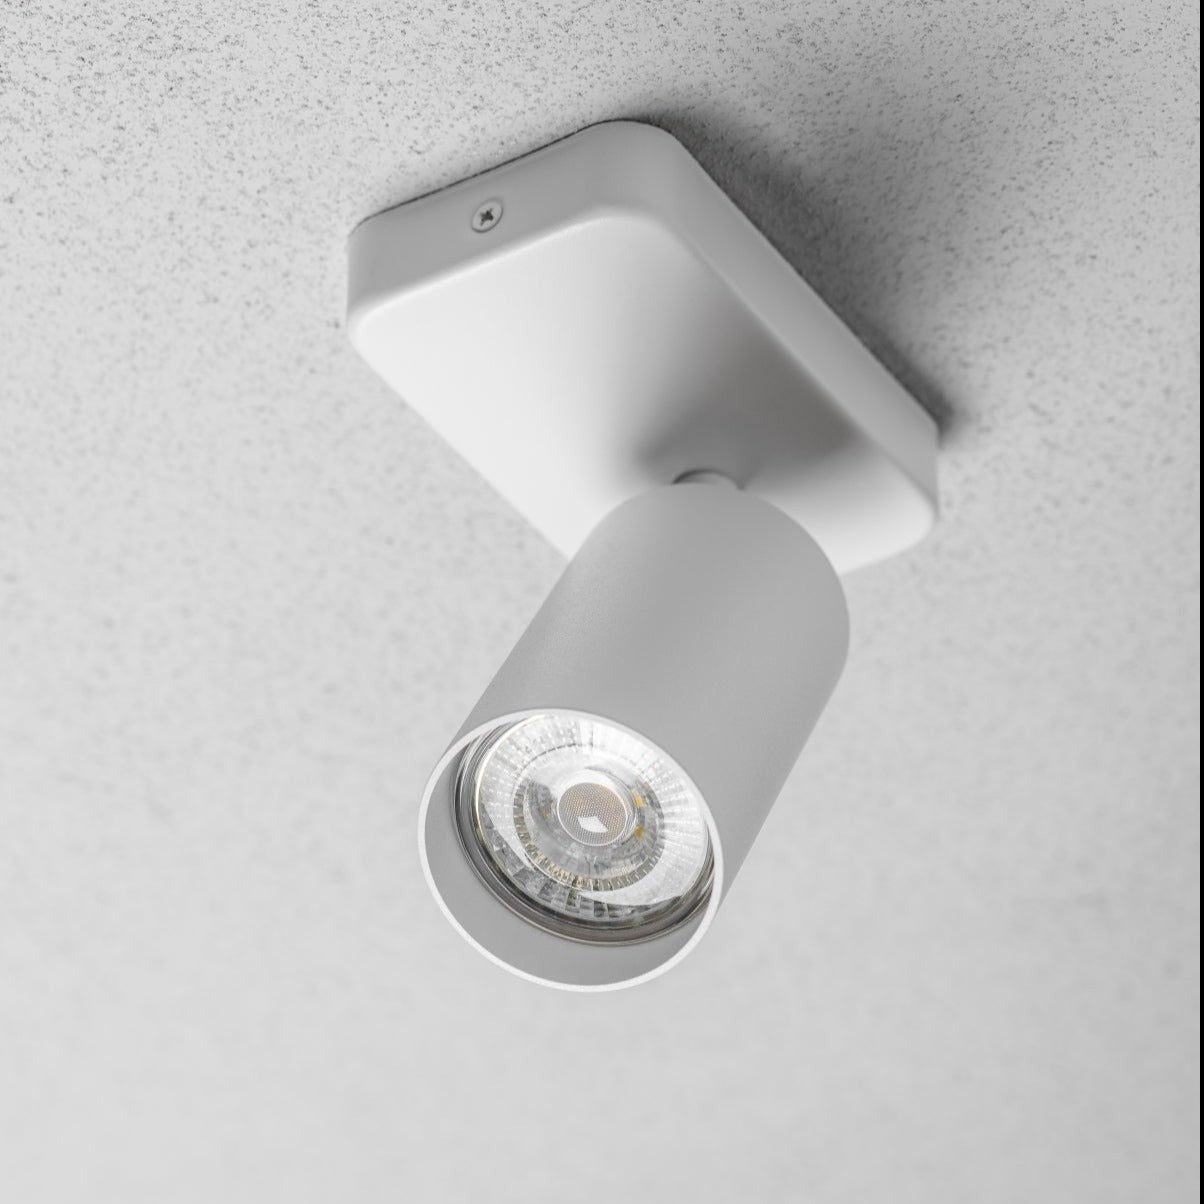 The white Nell lamp consists of a cylindrical spotlight, which can be tilted and adjusted on its own axis. The spotlight is attached to a rectangular bracket, which makes it equally suitable for mounting on walls and ceilings. Made of an aluminium body and powder coated white, the lamp with its simple design fits well into different spaces. 